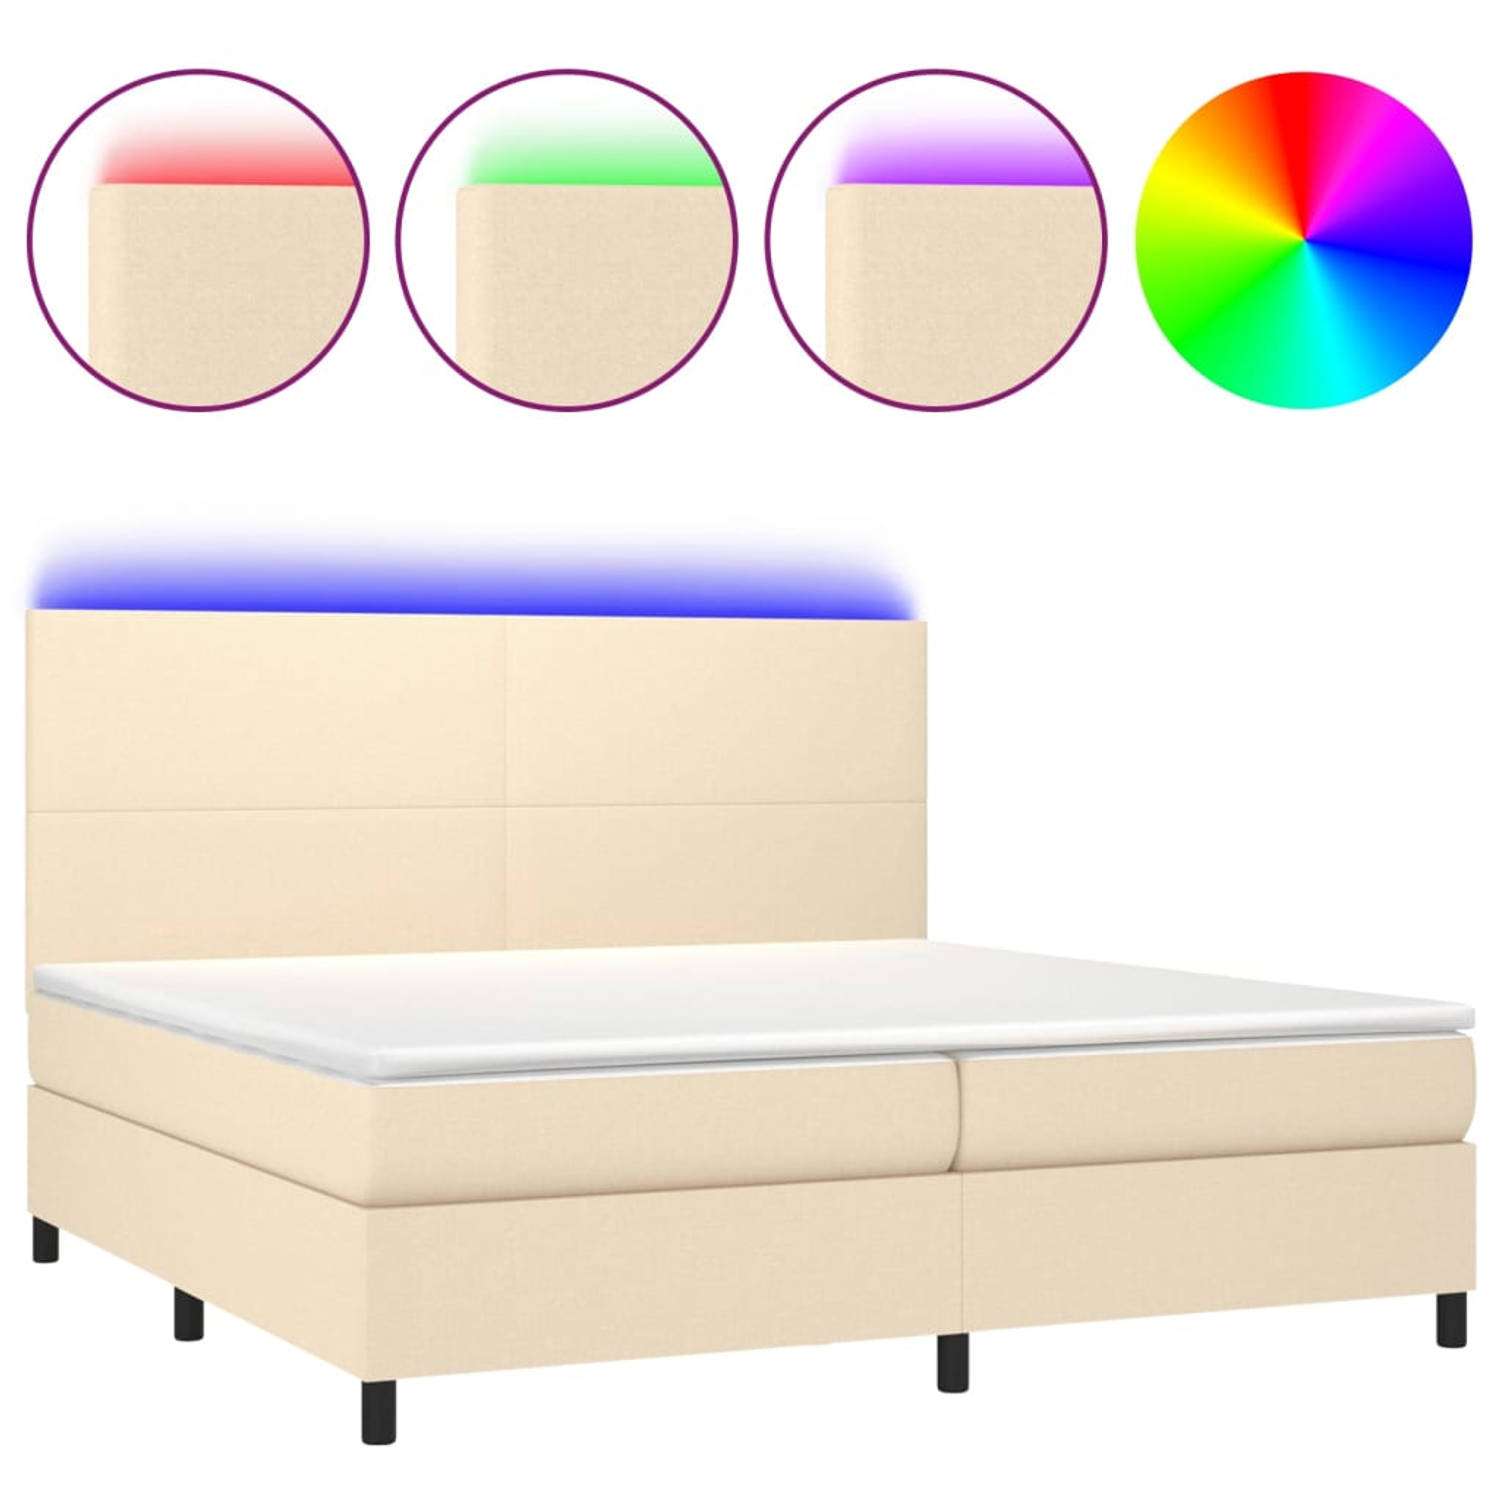 The Living Store Boxspring met matras en LED stof crèmekleurig 200x200 cm - Boxspring - Boxsprings - Bed - Slaapmeubel - Boxspringbed - Boxspring Bed - Tweepersoonsbed - Bed Met Ma